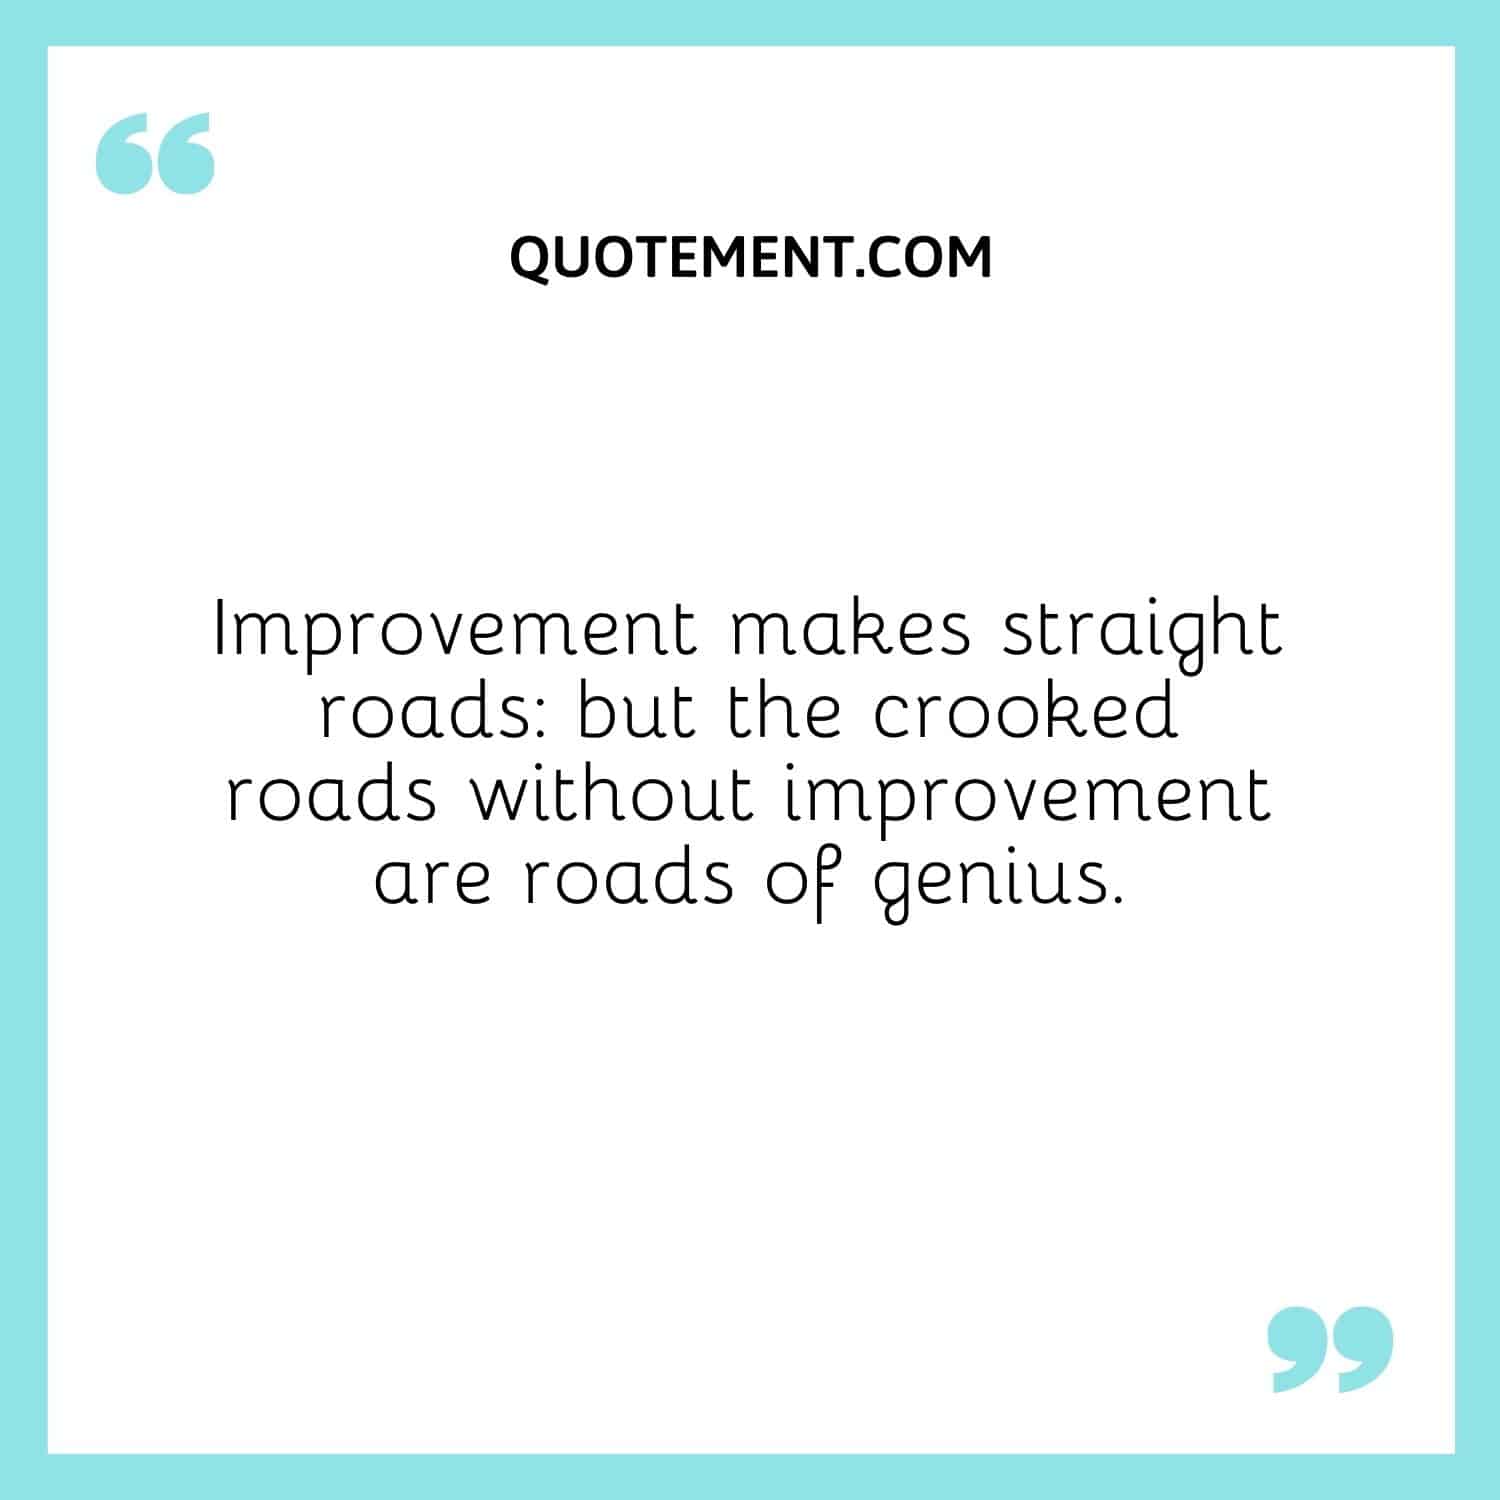 Improvement makes straight roads but the crooked roads without improvement are roads of genius.